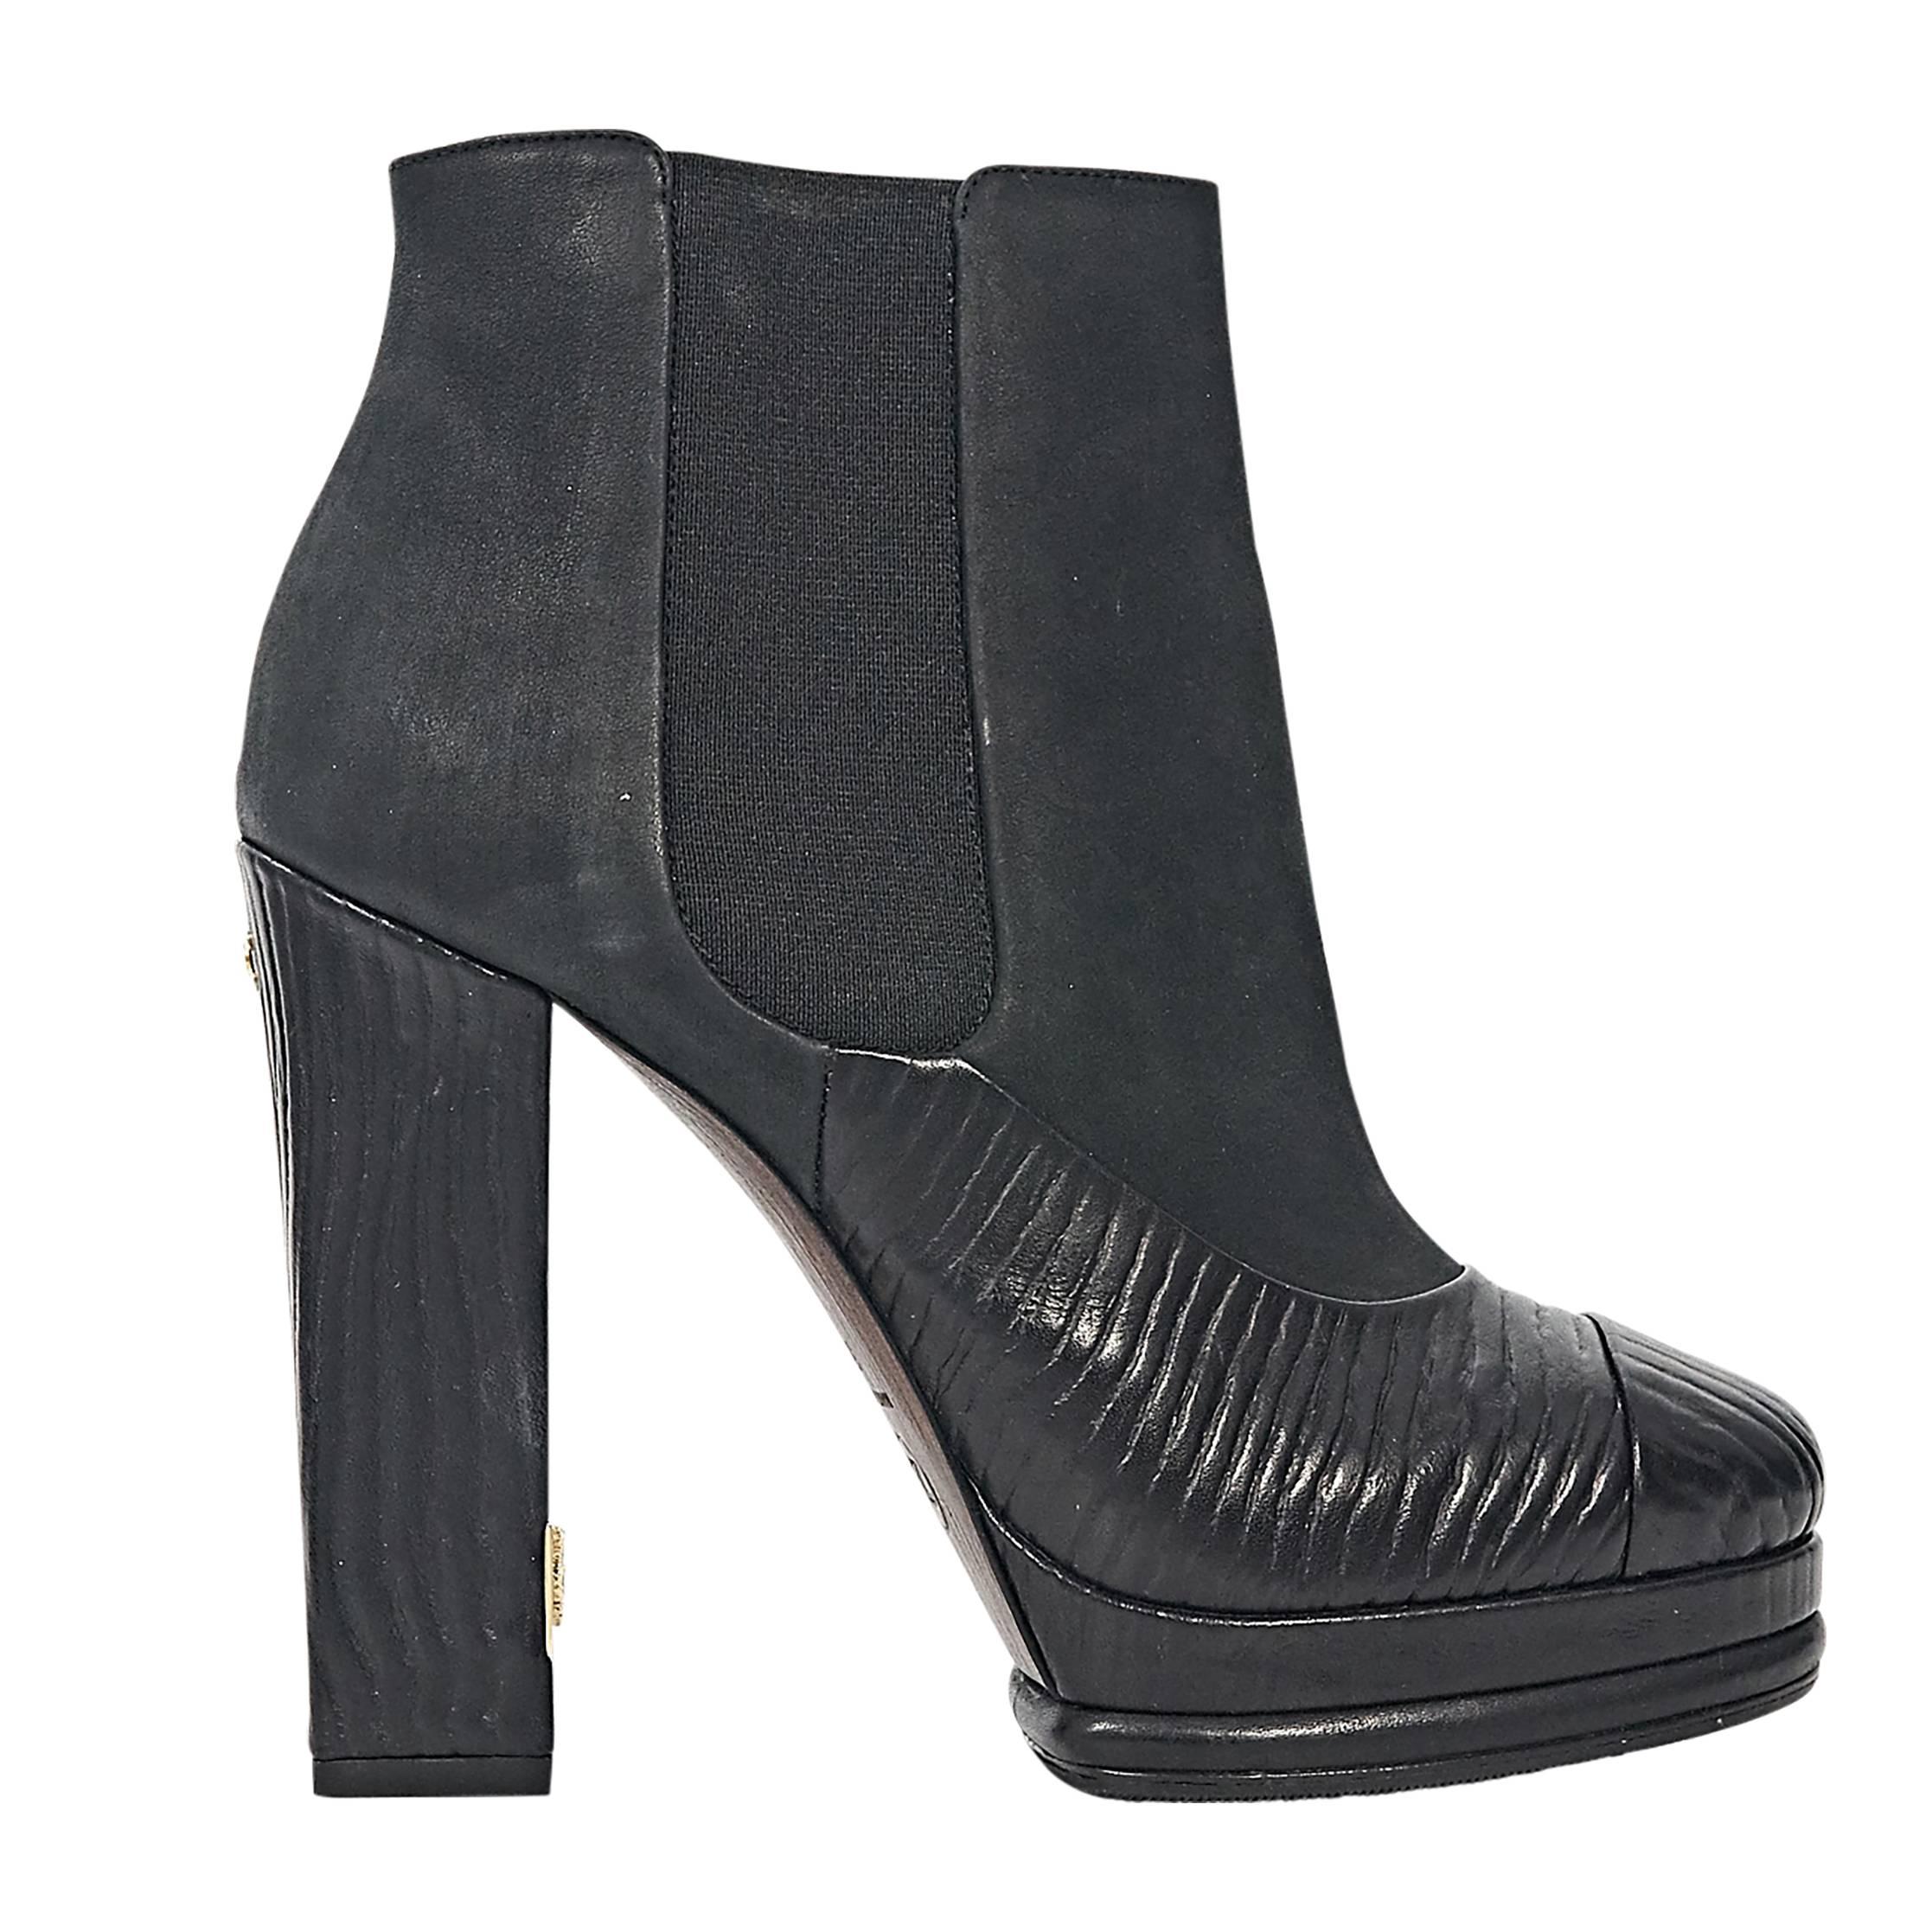 Black Chanel Textured Heeled Chelsea Boots